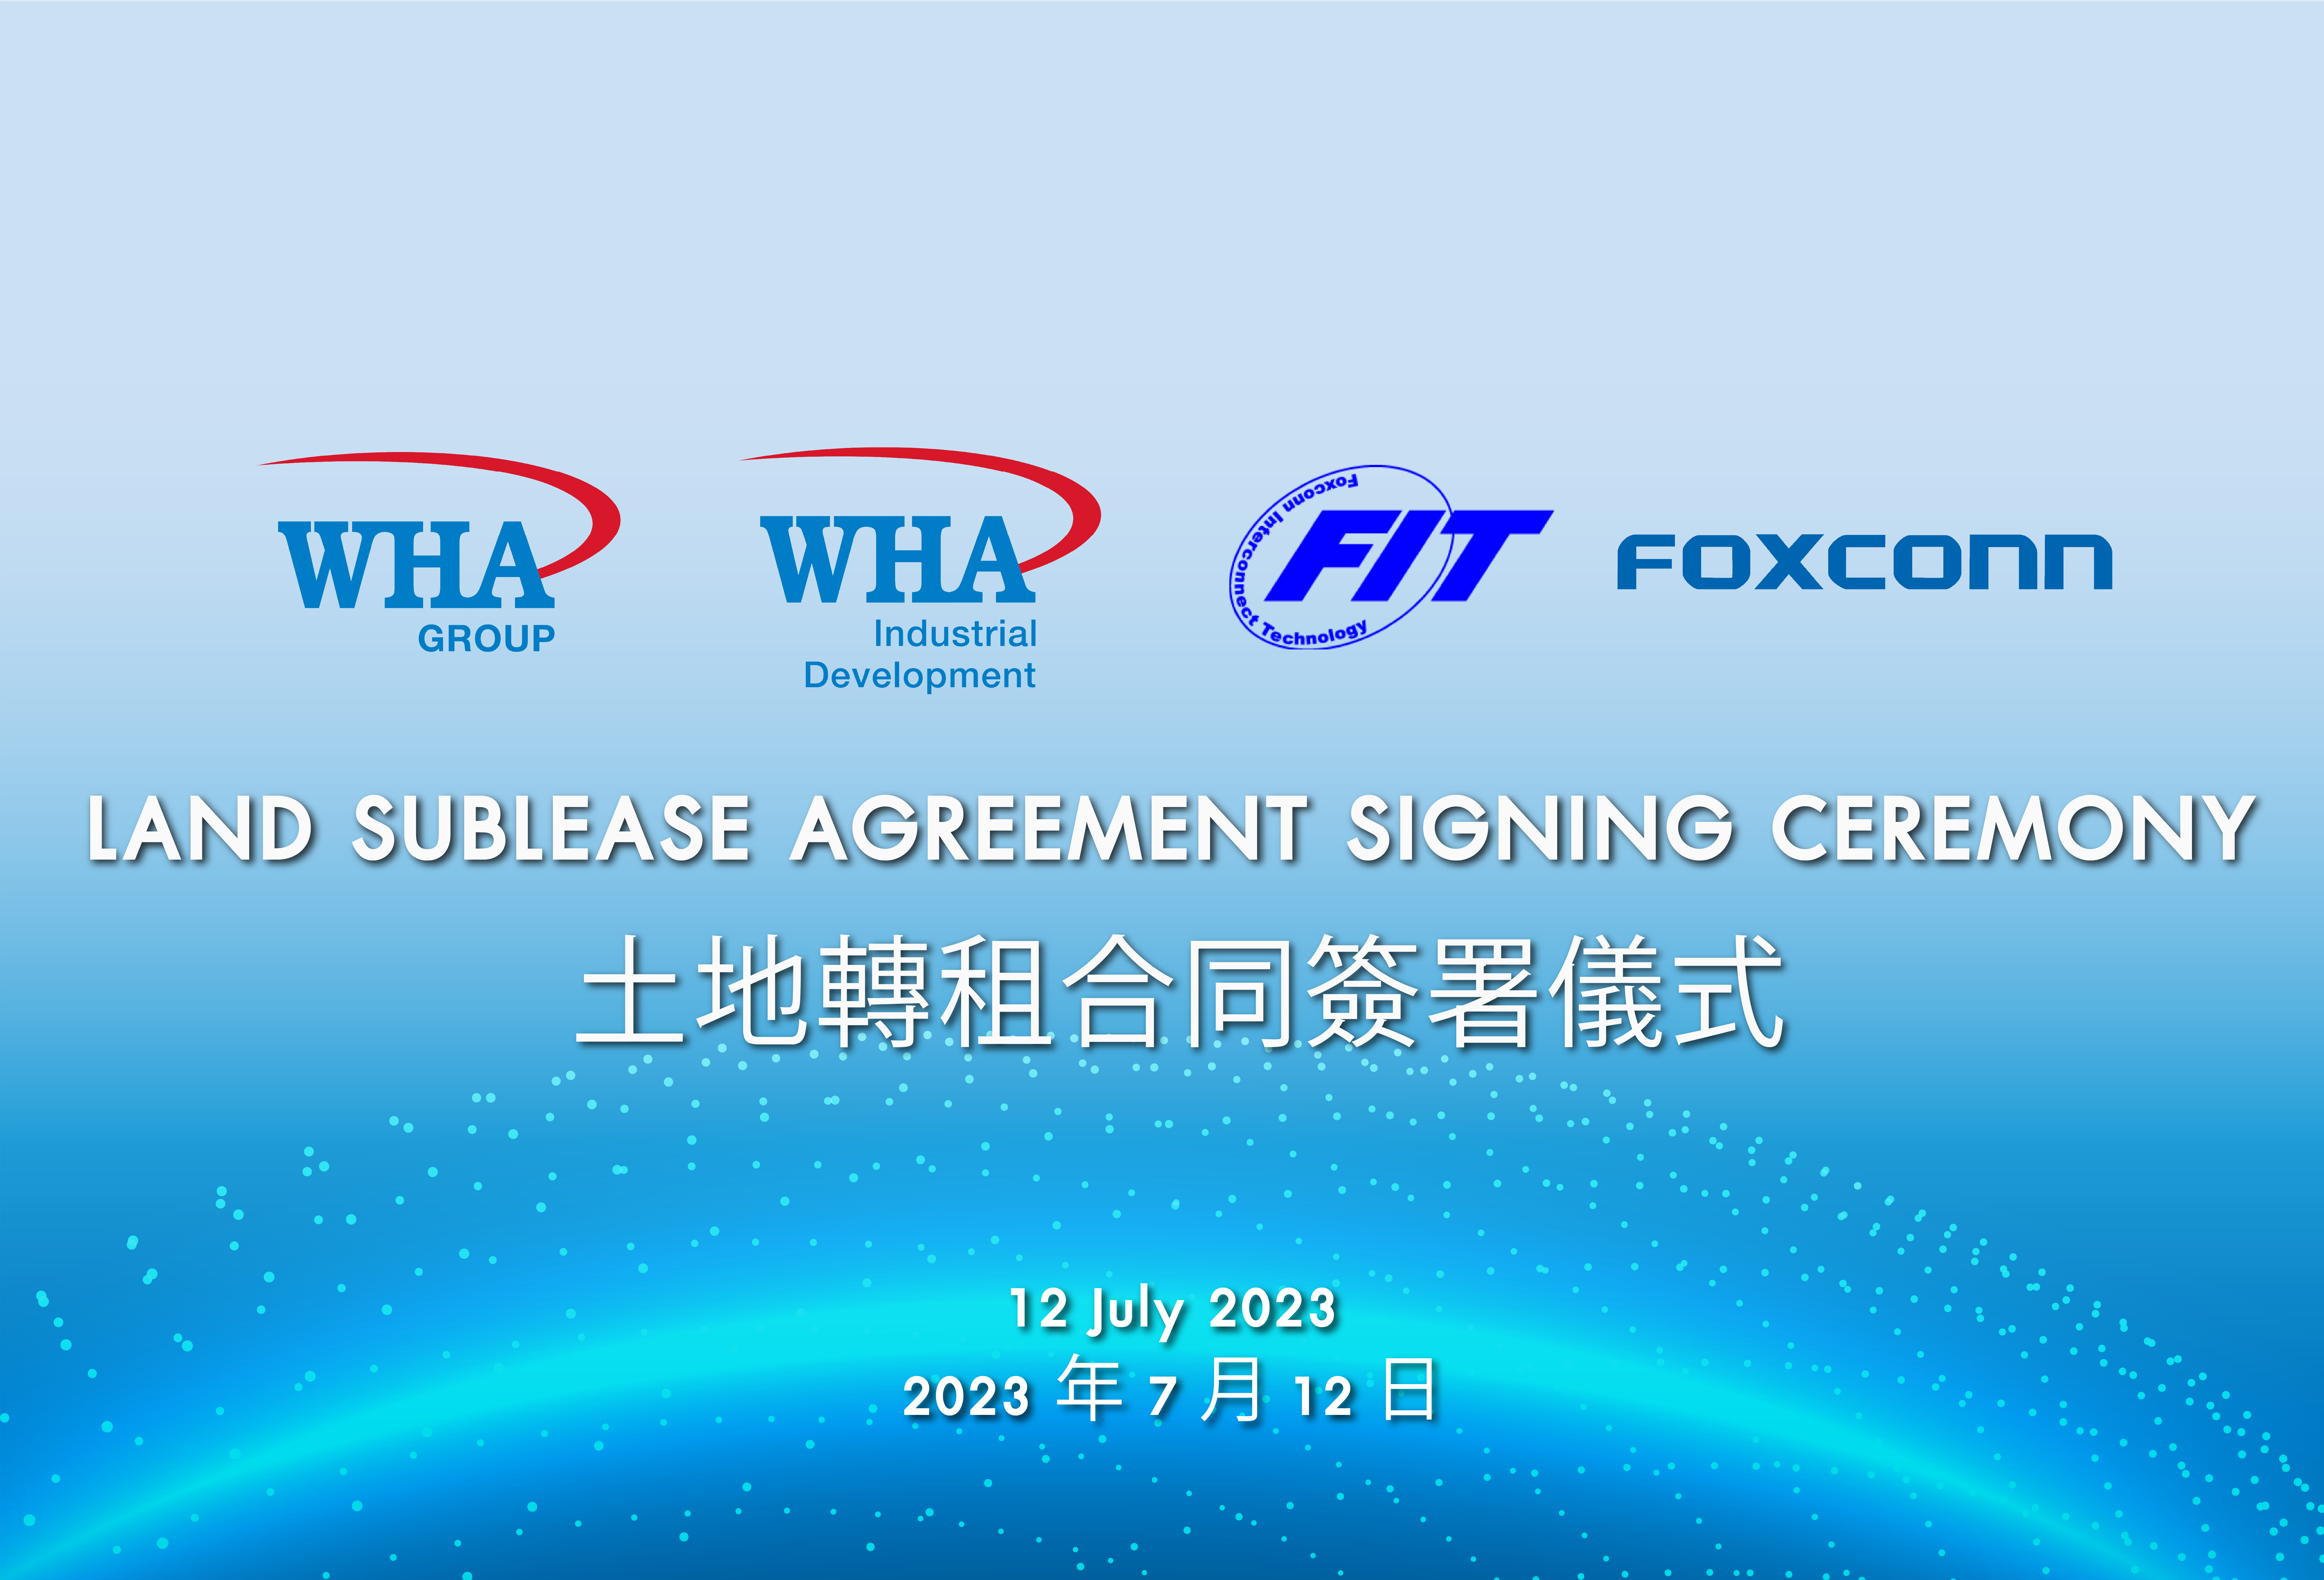 Inks Land Lease Agreement with Foxconn Subsidiary in WHA Industrial Zone 1 – Nghe An, Vietnam